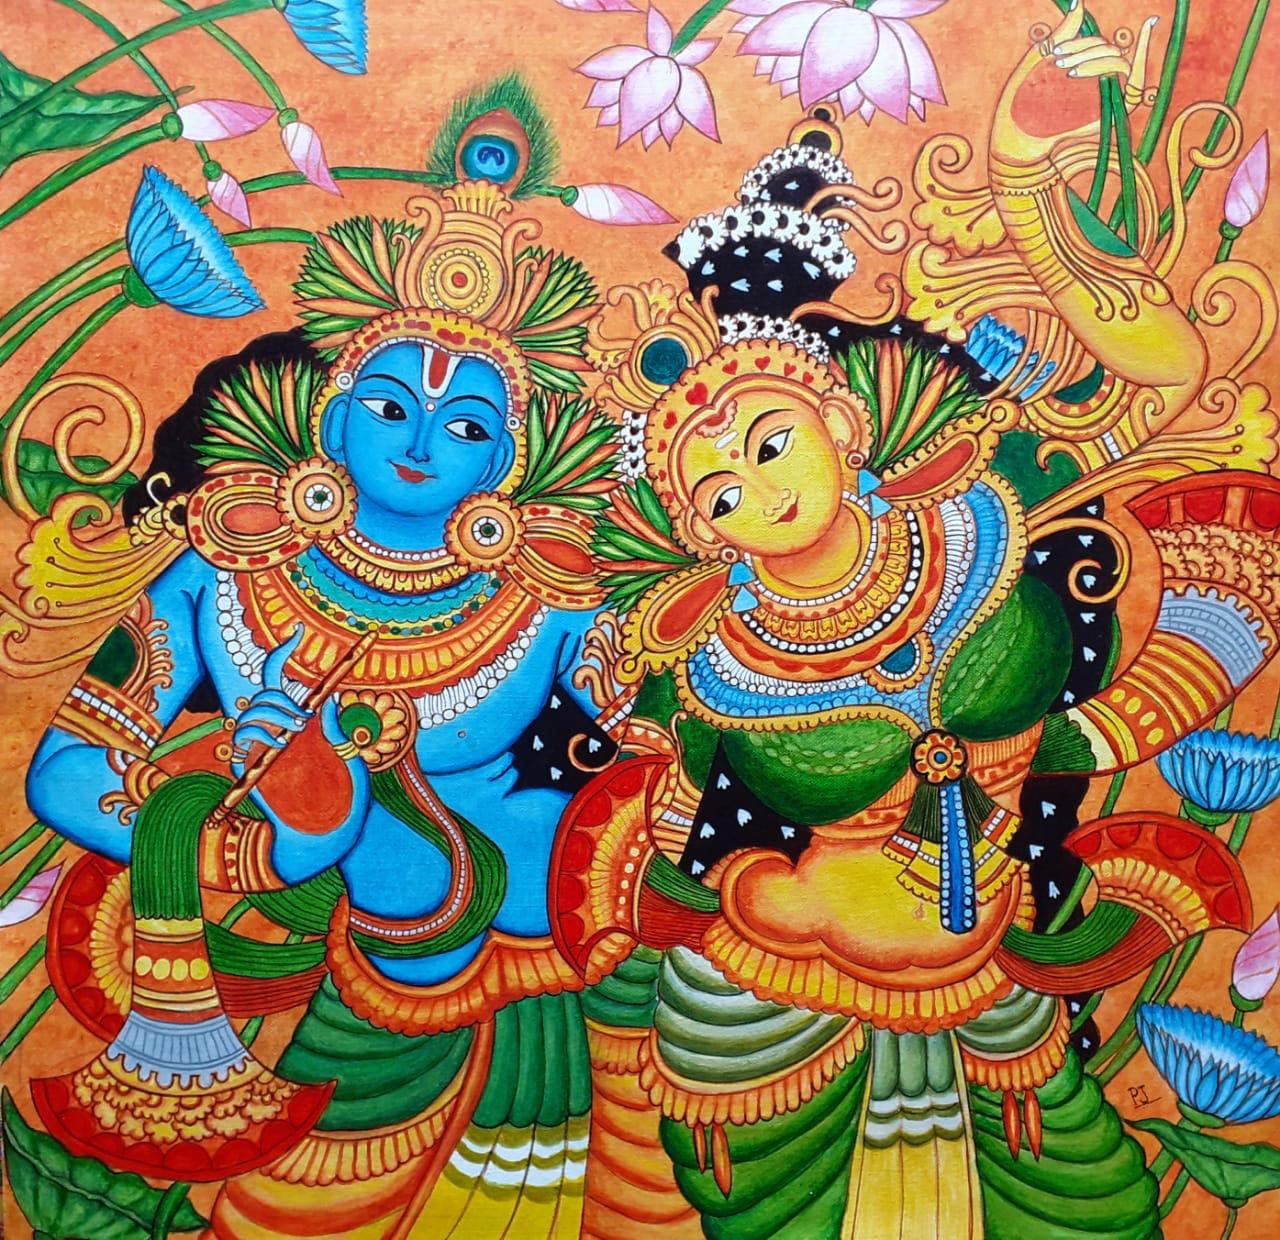 Radha Krishna #1 - Kerala Mural (32 x 36 cms) - International Indian Folk  Art GalleryAn exquisite selection of traditional and famous paintings from  India for Hindu Puja room, living room, bedroom,